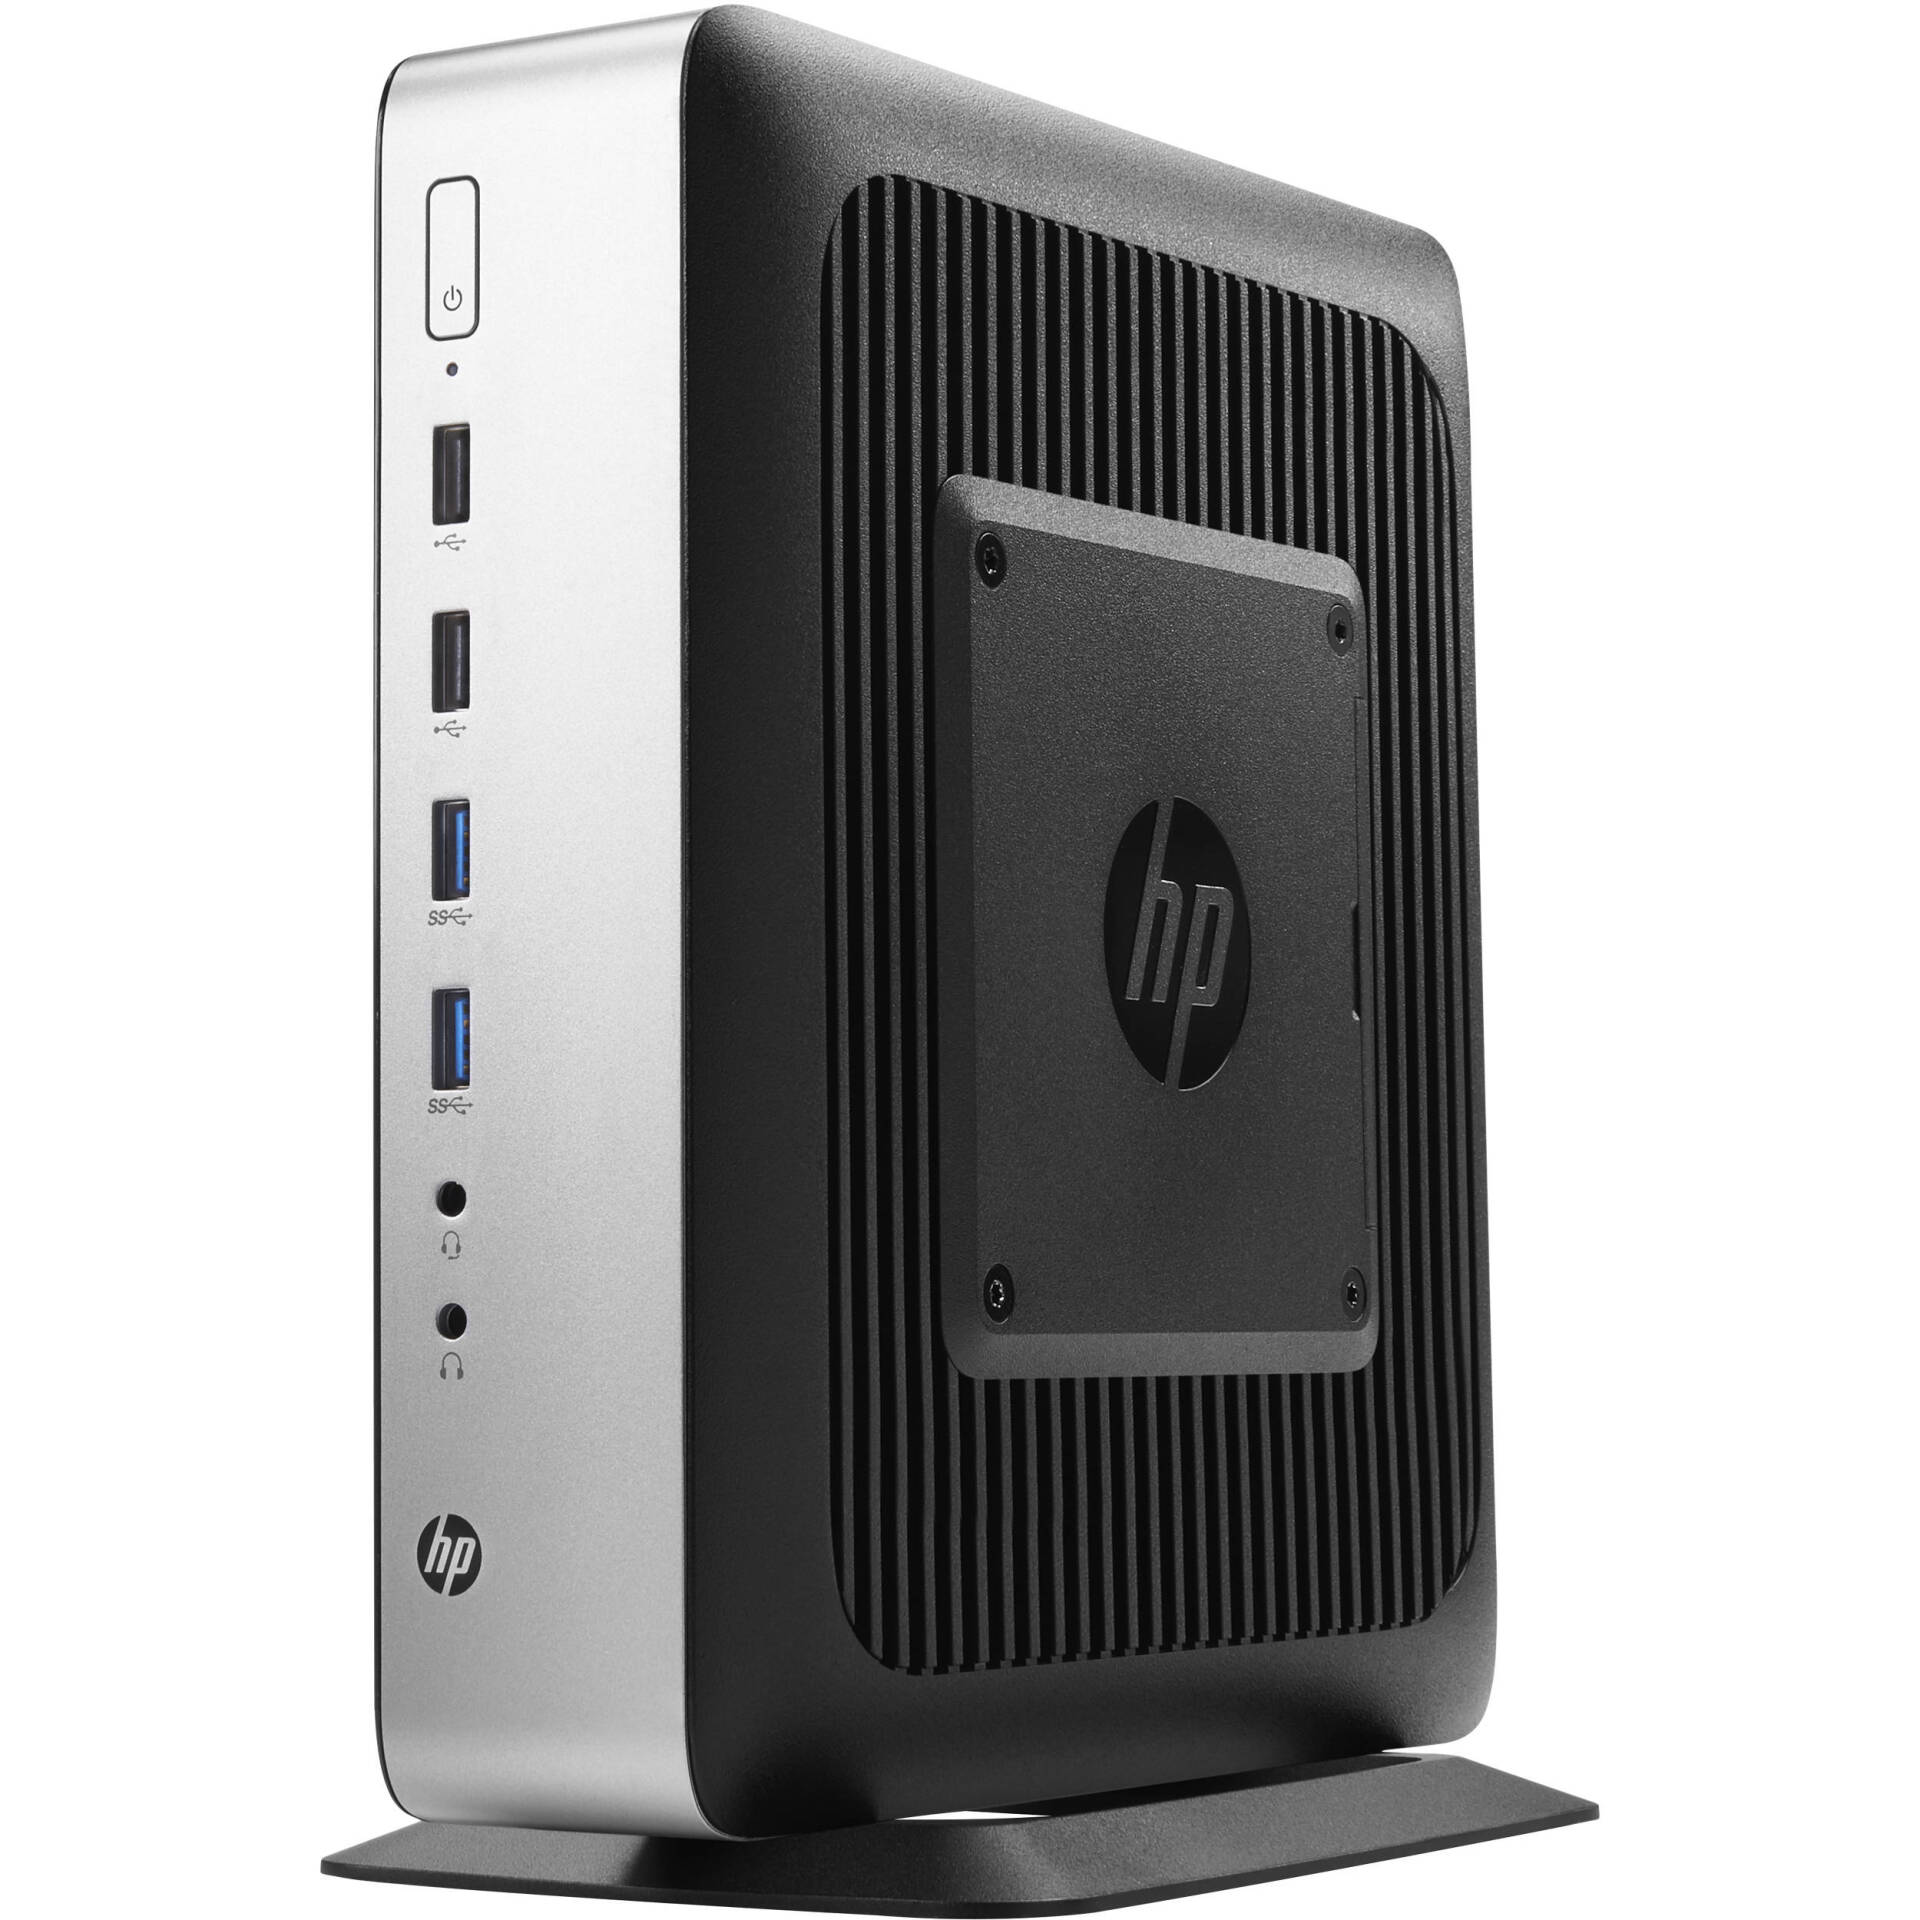 We buy used HP Thin Clients